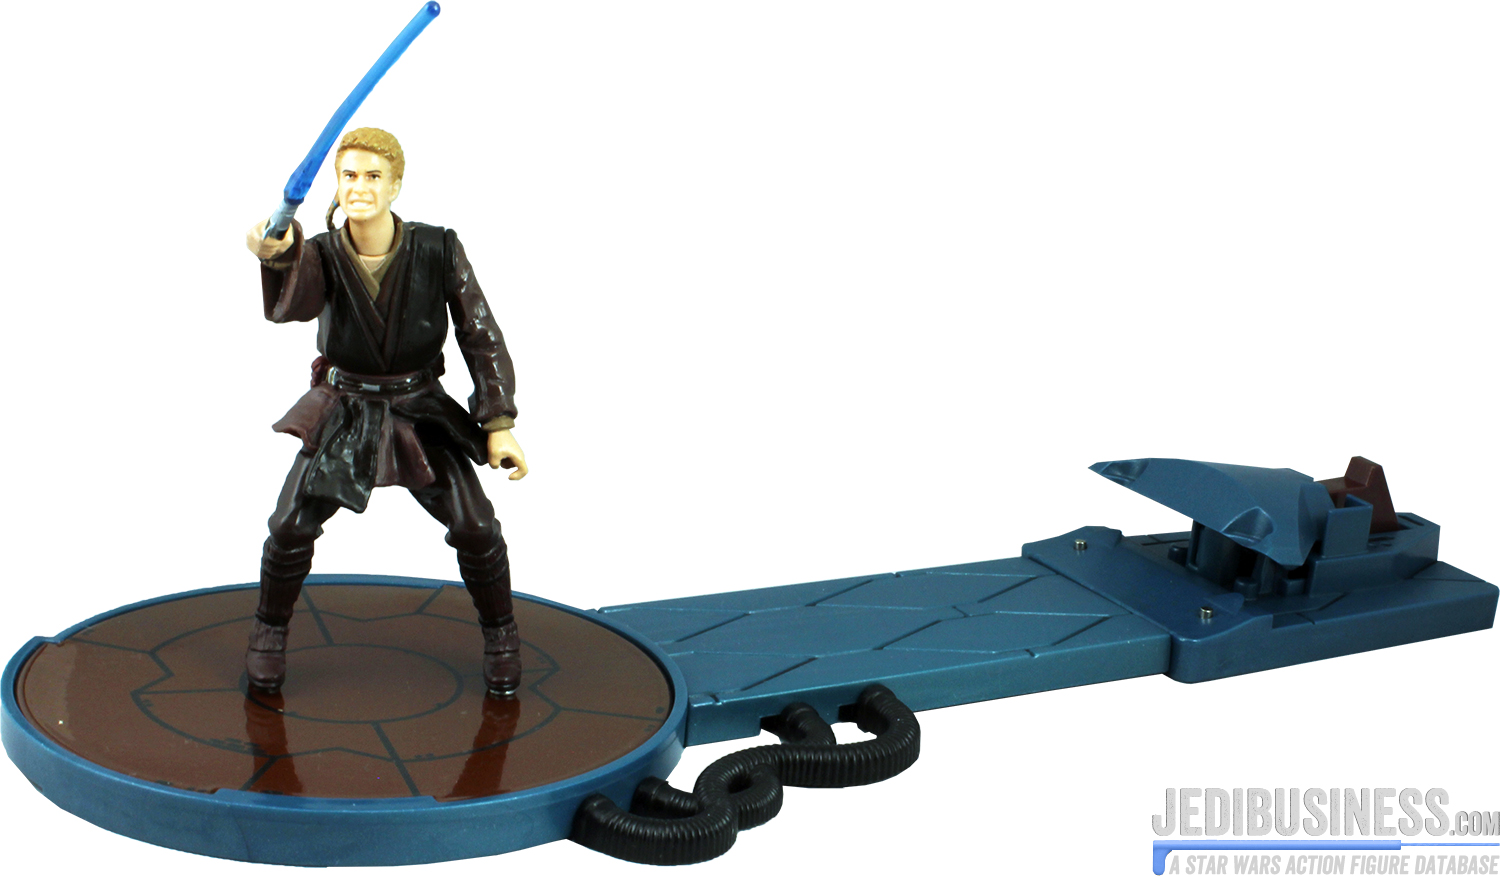 Anakin Skywalker with Force-Flipping Attack!